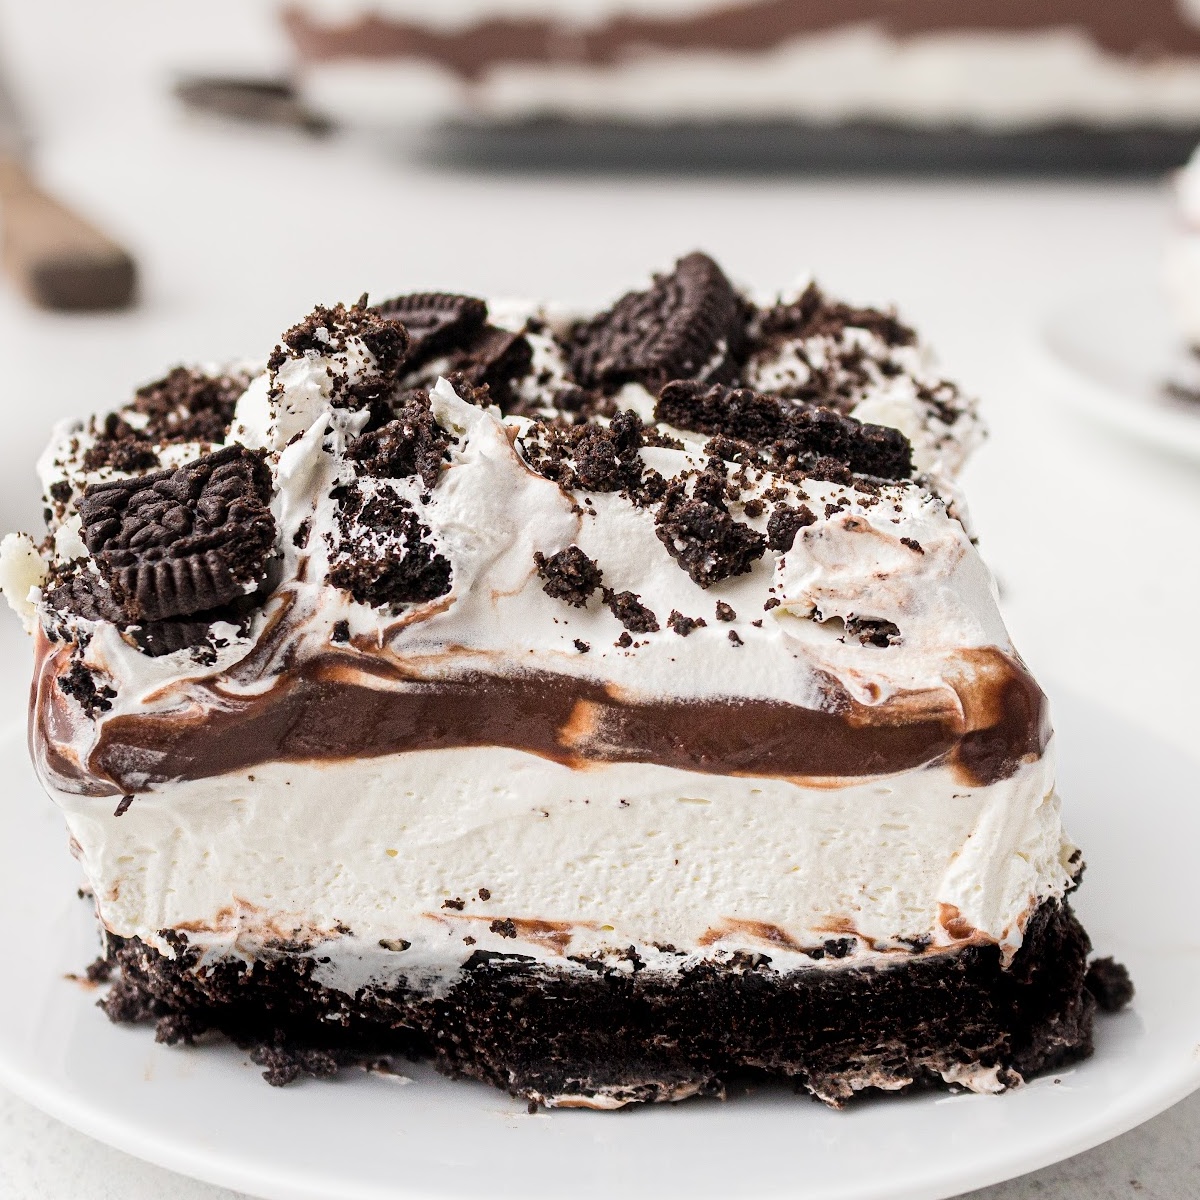 Oreo Delight - Us in the Kitchen